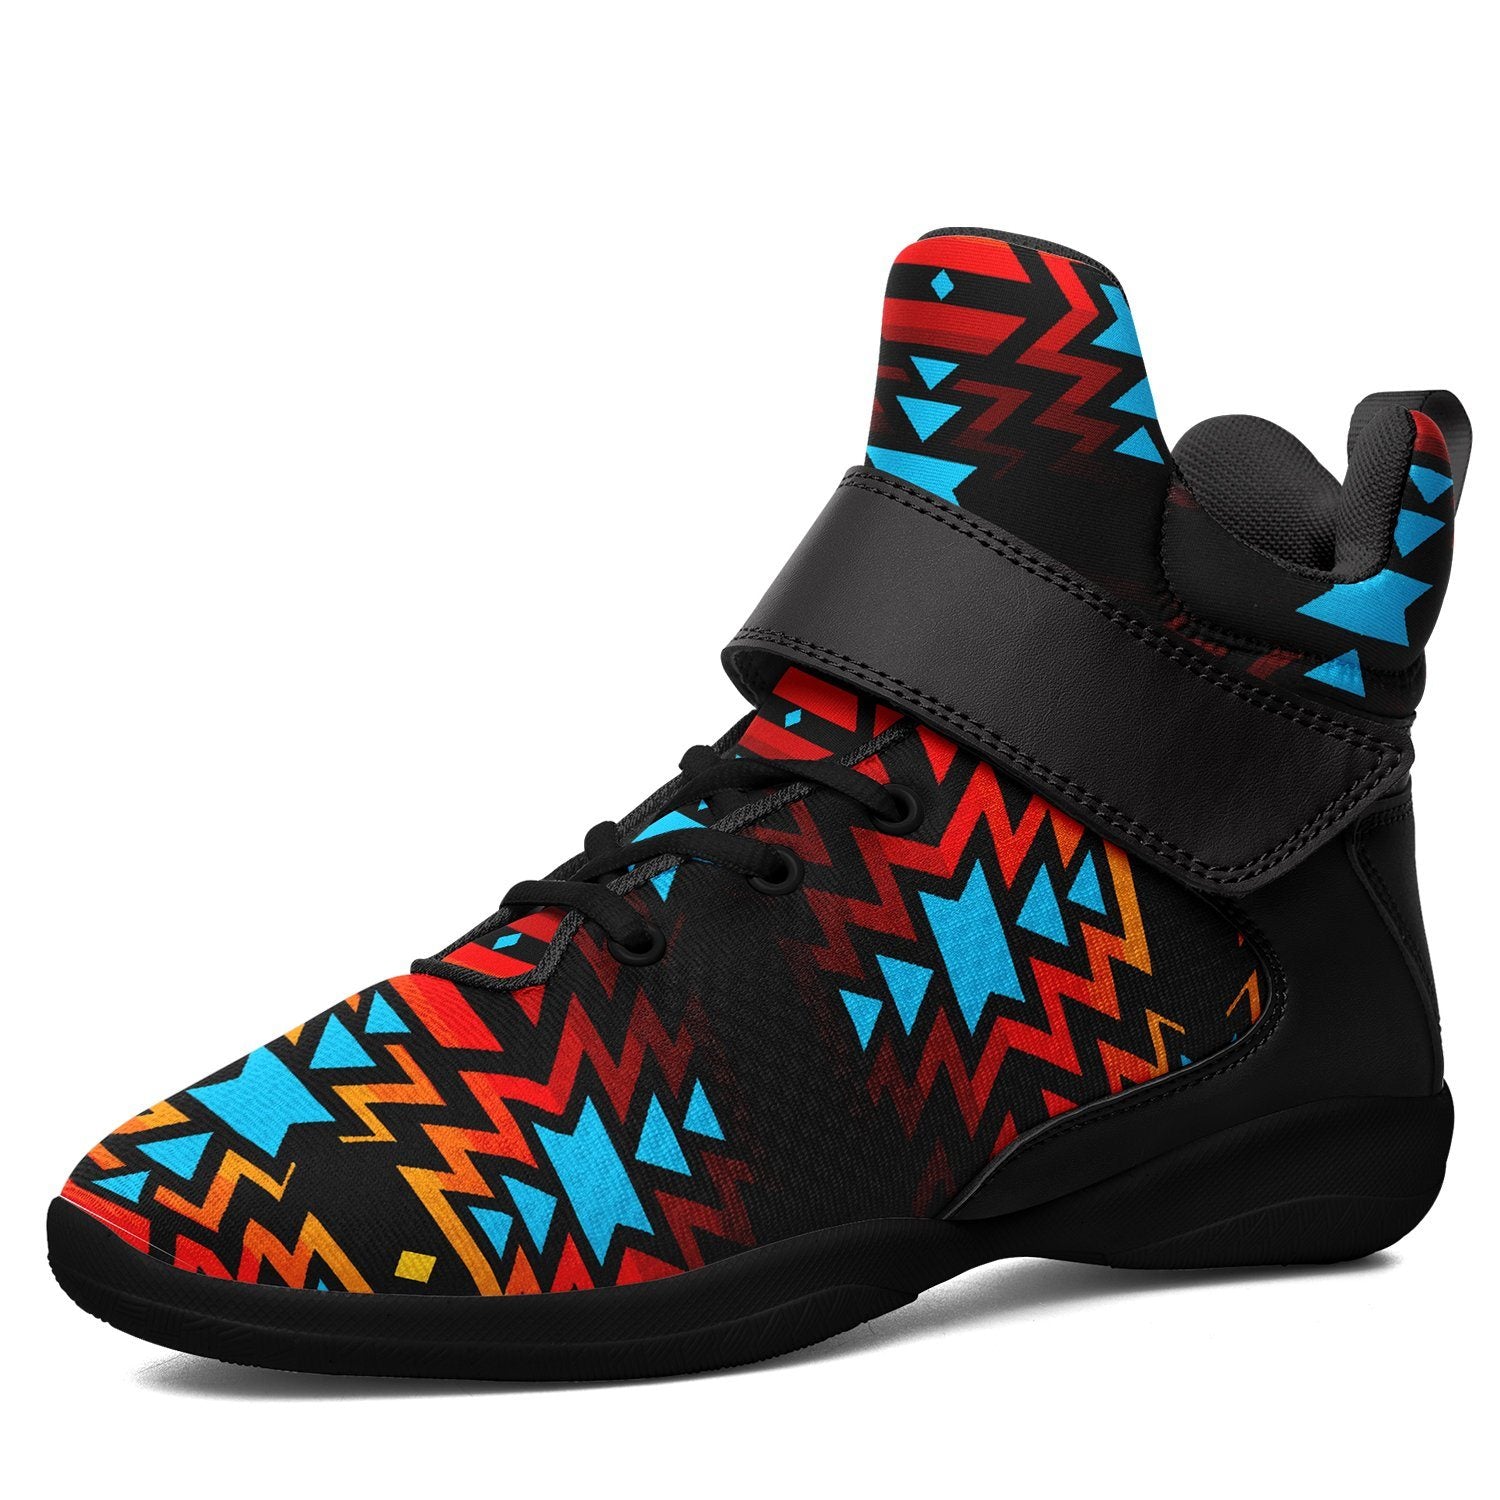 Black Fire and Turquoise Ipottaa Basketball / Sport High Top Shoes 49 Dzine US Women 4.5 / US Youth 3.5 / EUR 35 Black Sole with Black Strap 